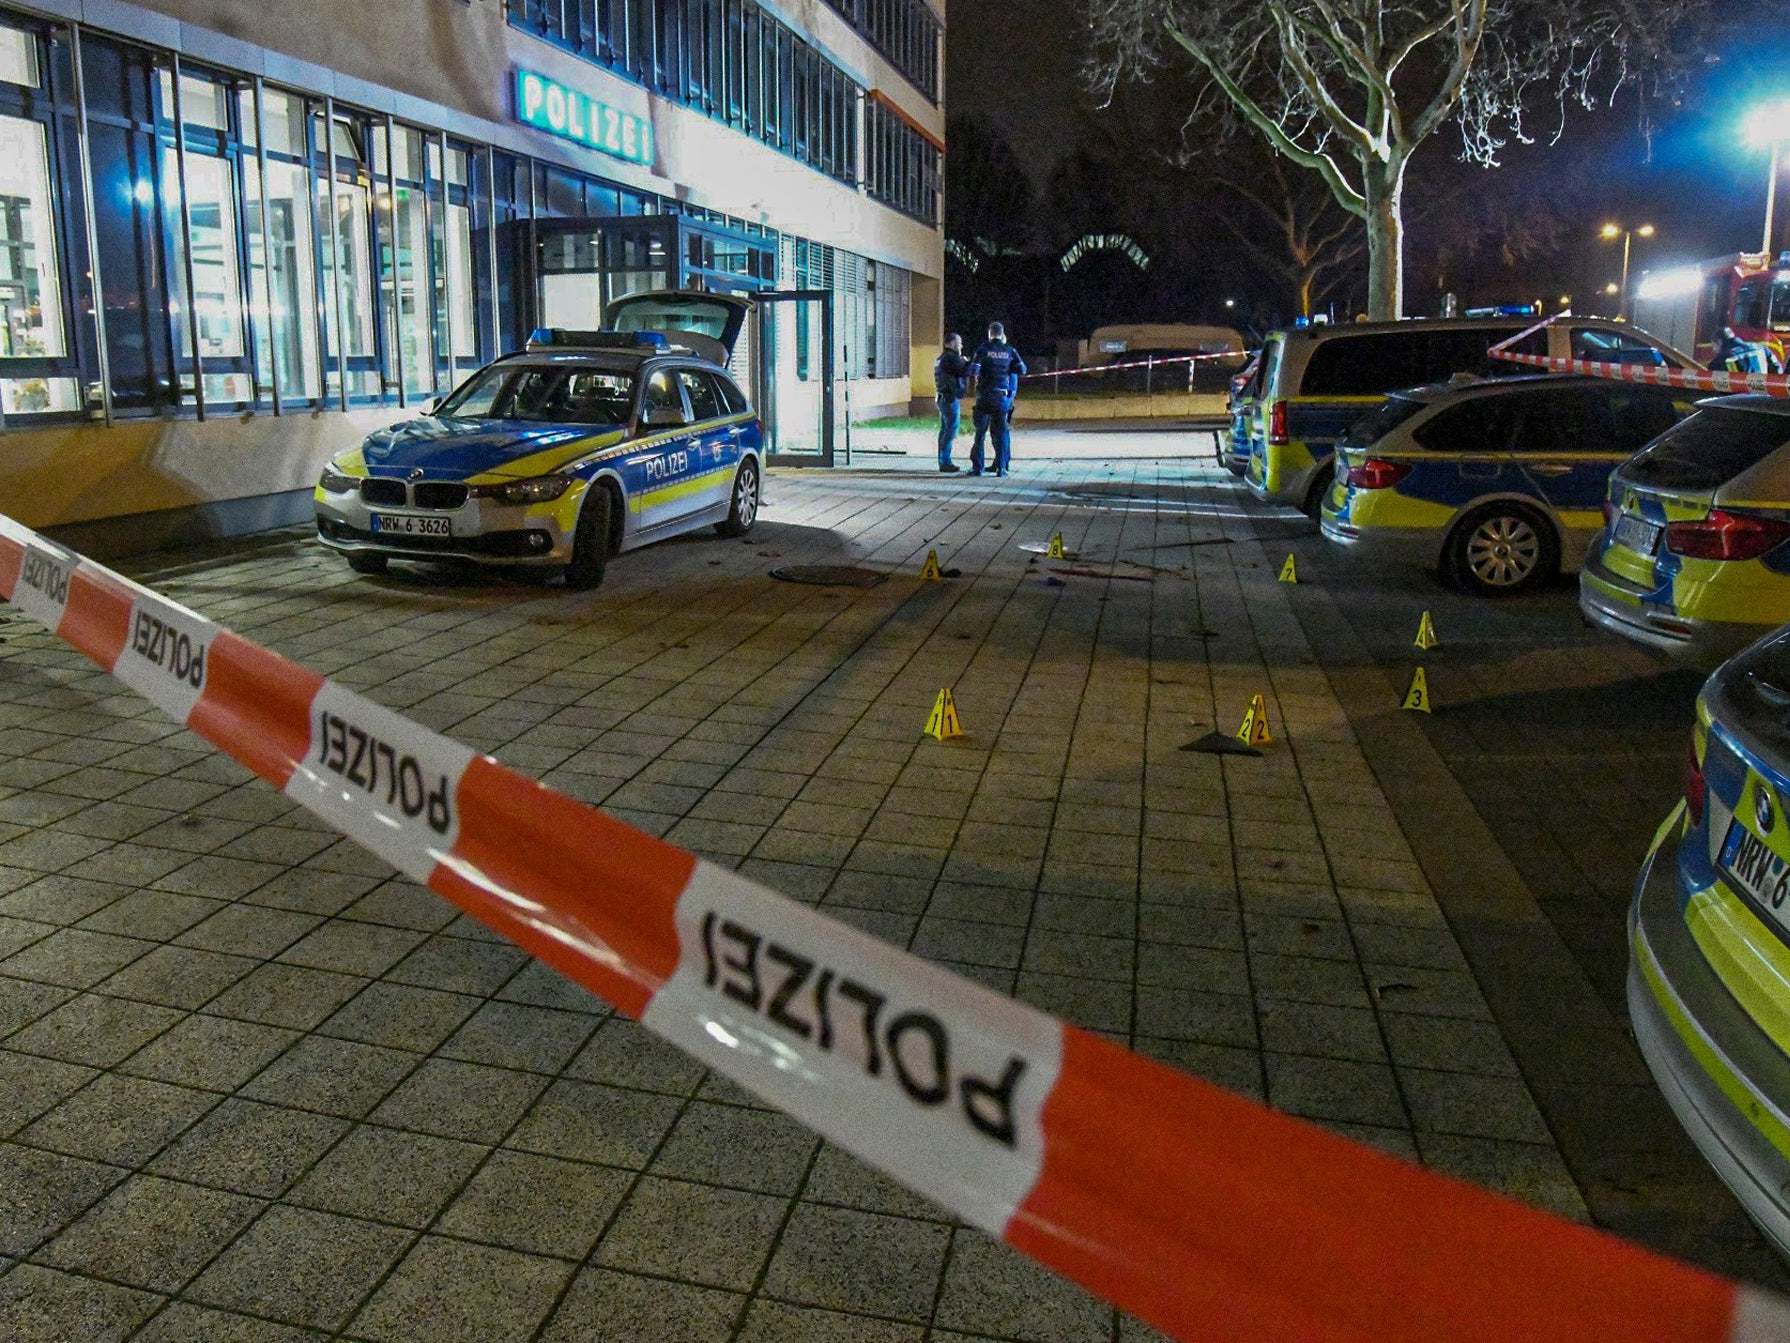 German police officers stand at the crime scene in front of a police station in Gelsenkirchen, Germany